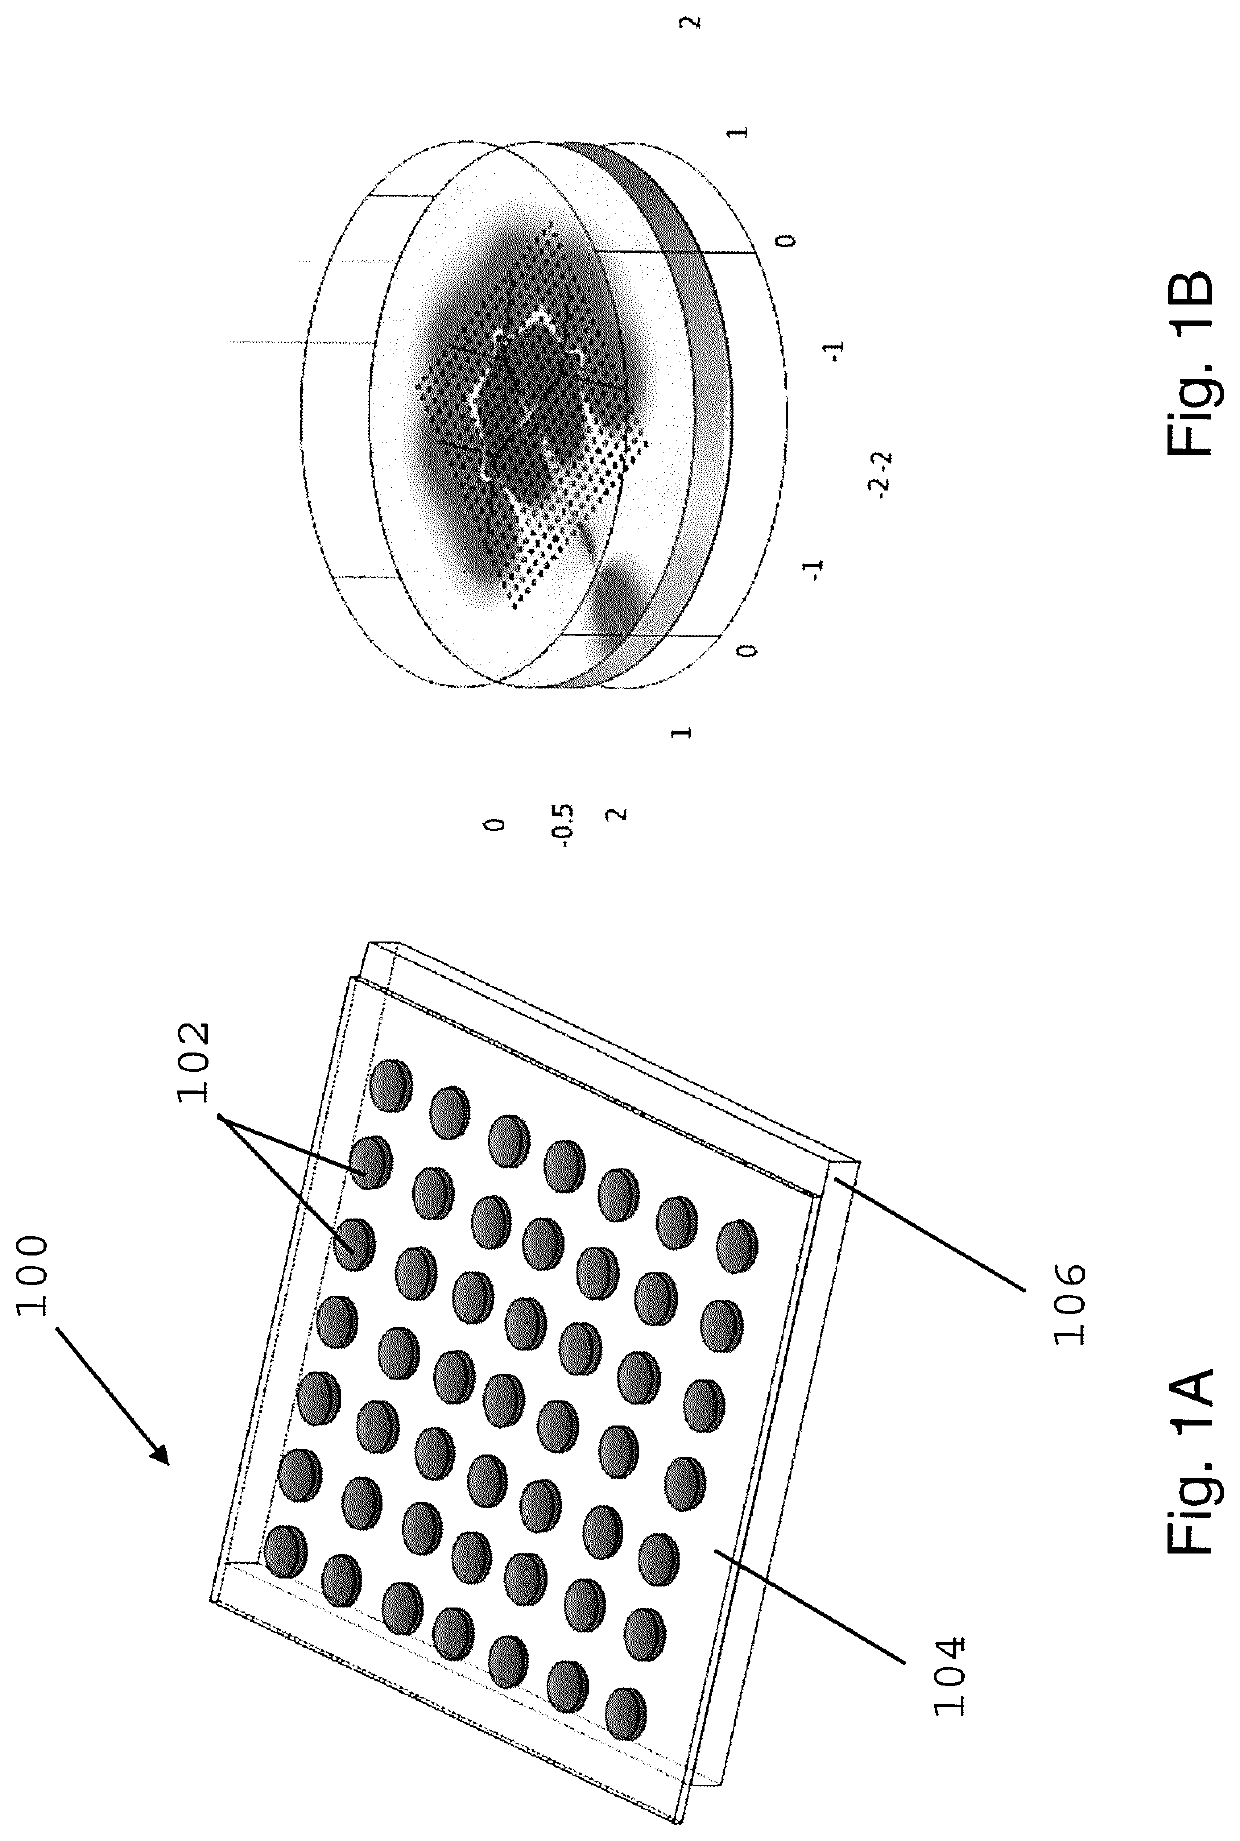 Optrode device